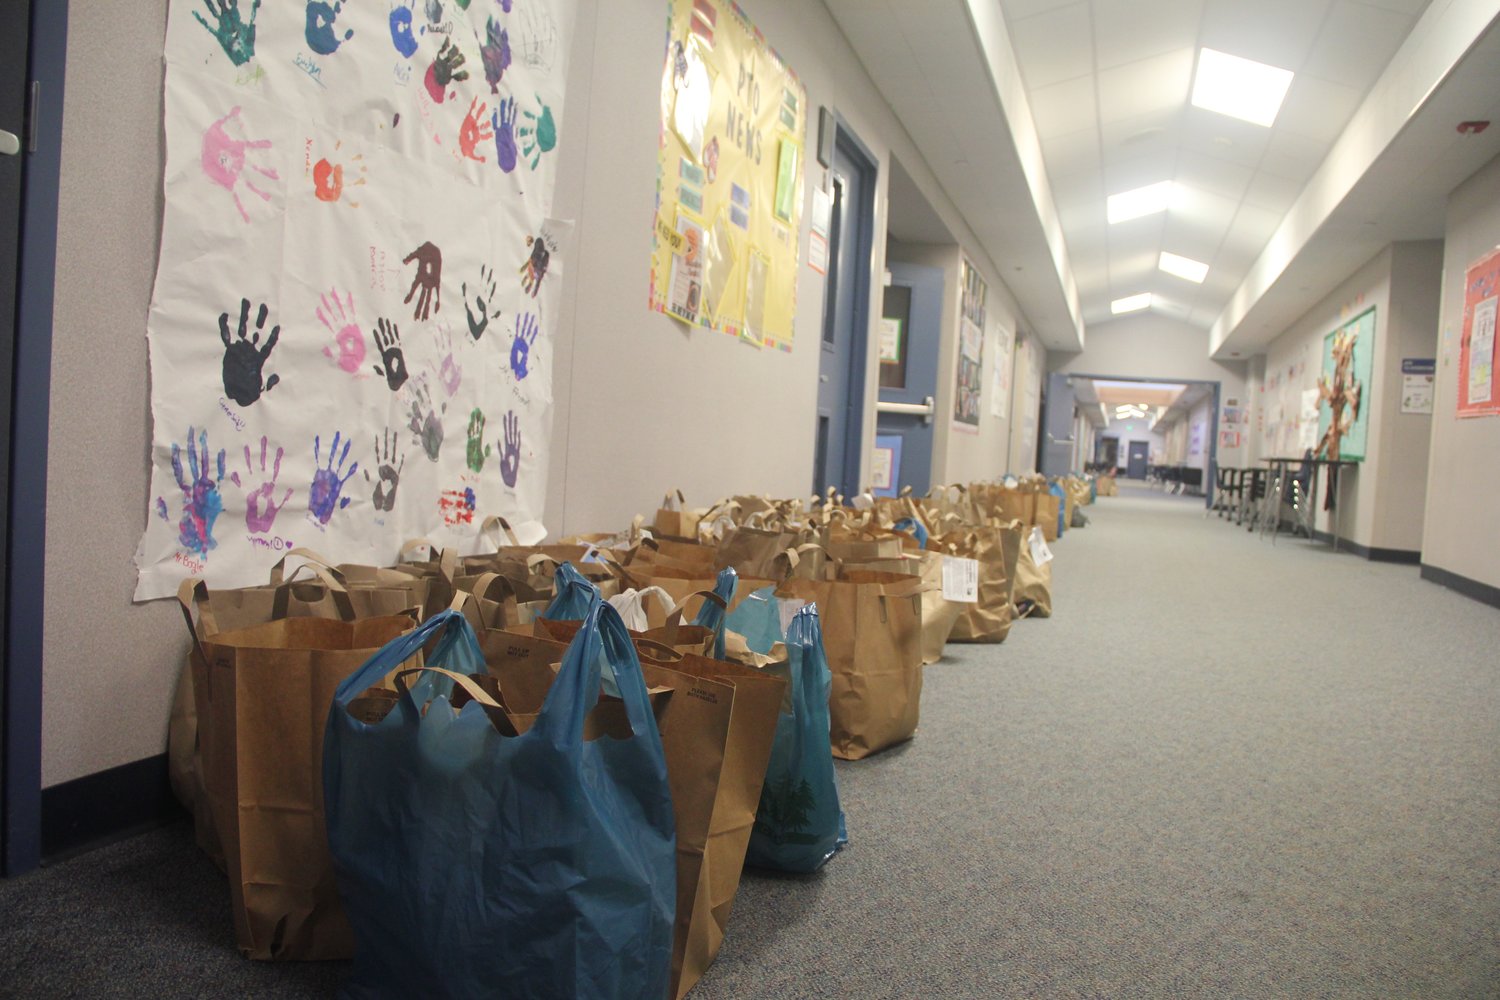 Food collected by Blaine school students stretched down the hall in Blaine Elementary School. Although the amount of food hadn’t been counted by November 21, school staff expects it to likely exceed the 11,000 pounds of food that were collected last year. Blaine elementary and primary students, above, partnered with Cost Cutter to collect food and monetary donations. From l. top row; Dylan Magnussen, Bryce Bradley, Eloise Olsen, Nolan Lewis, Mason Nowakowski, Teagan Wystrup. From l. bottom row; Maddy Hawkins and Toby Hawkins.